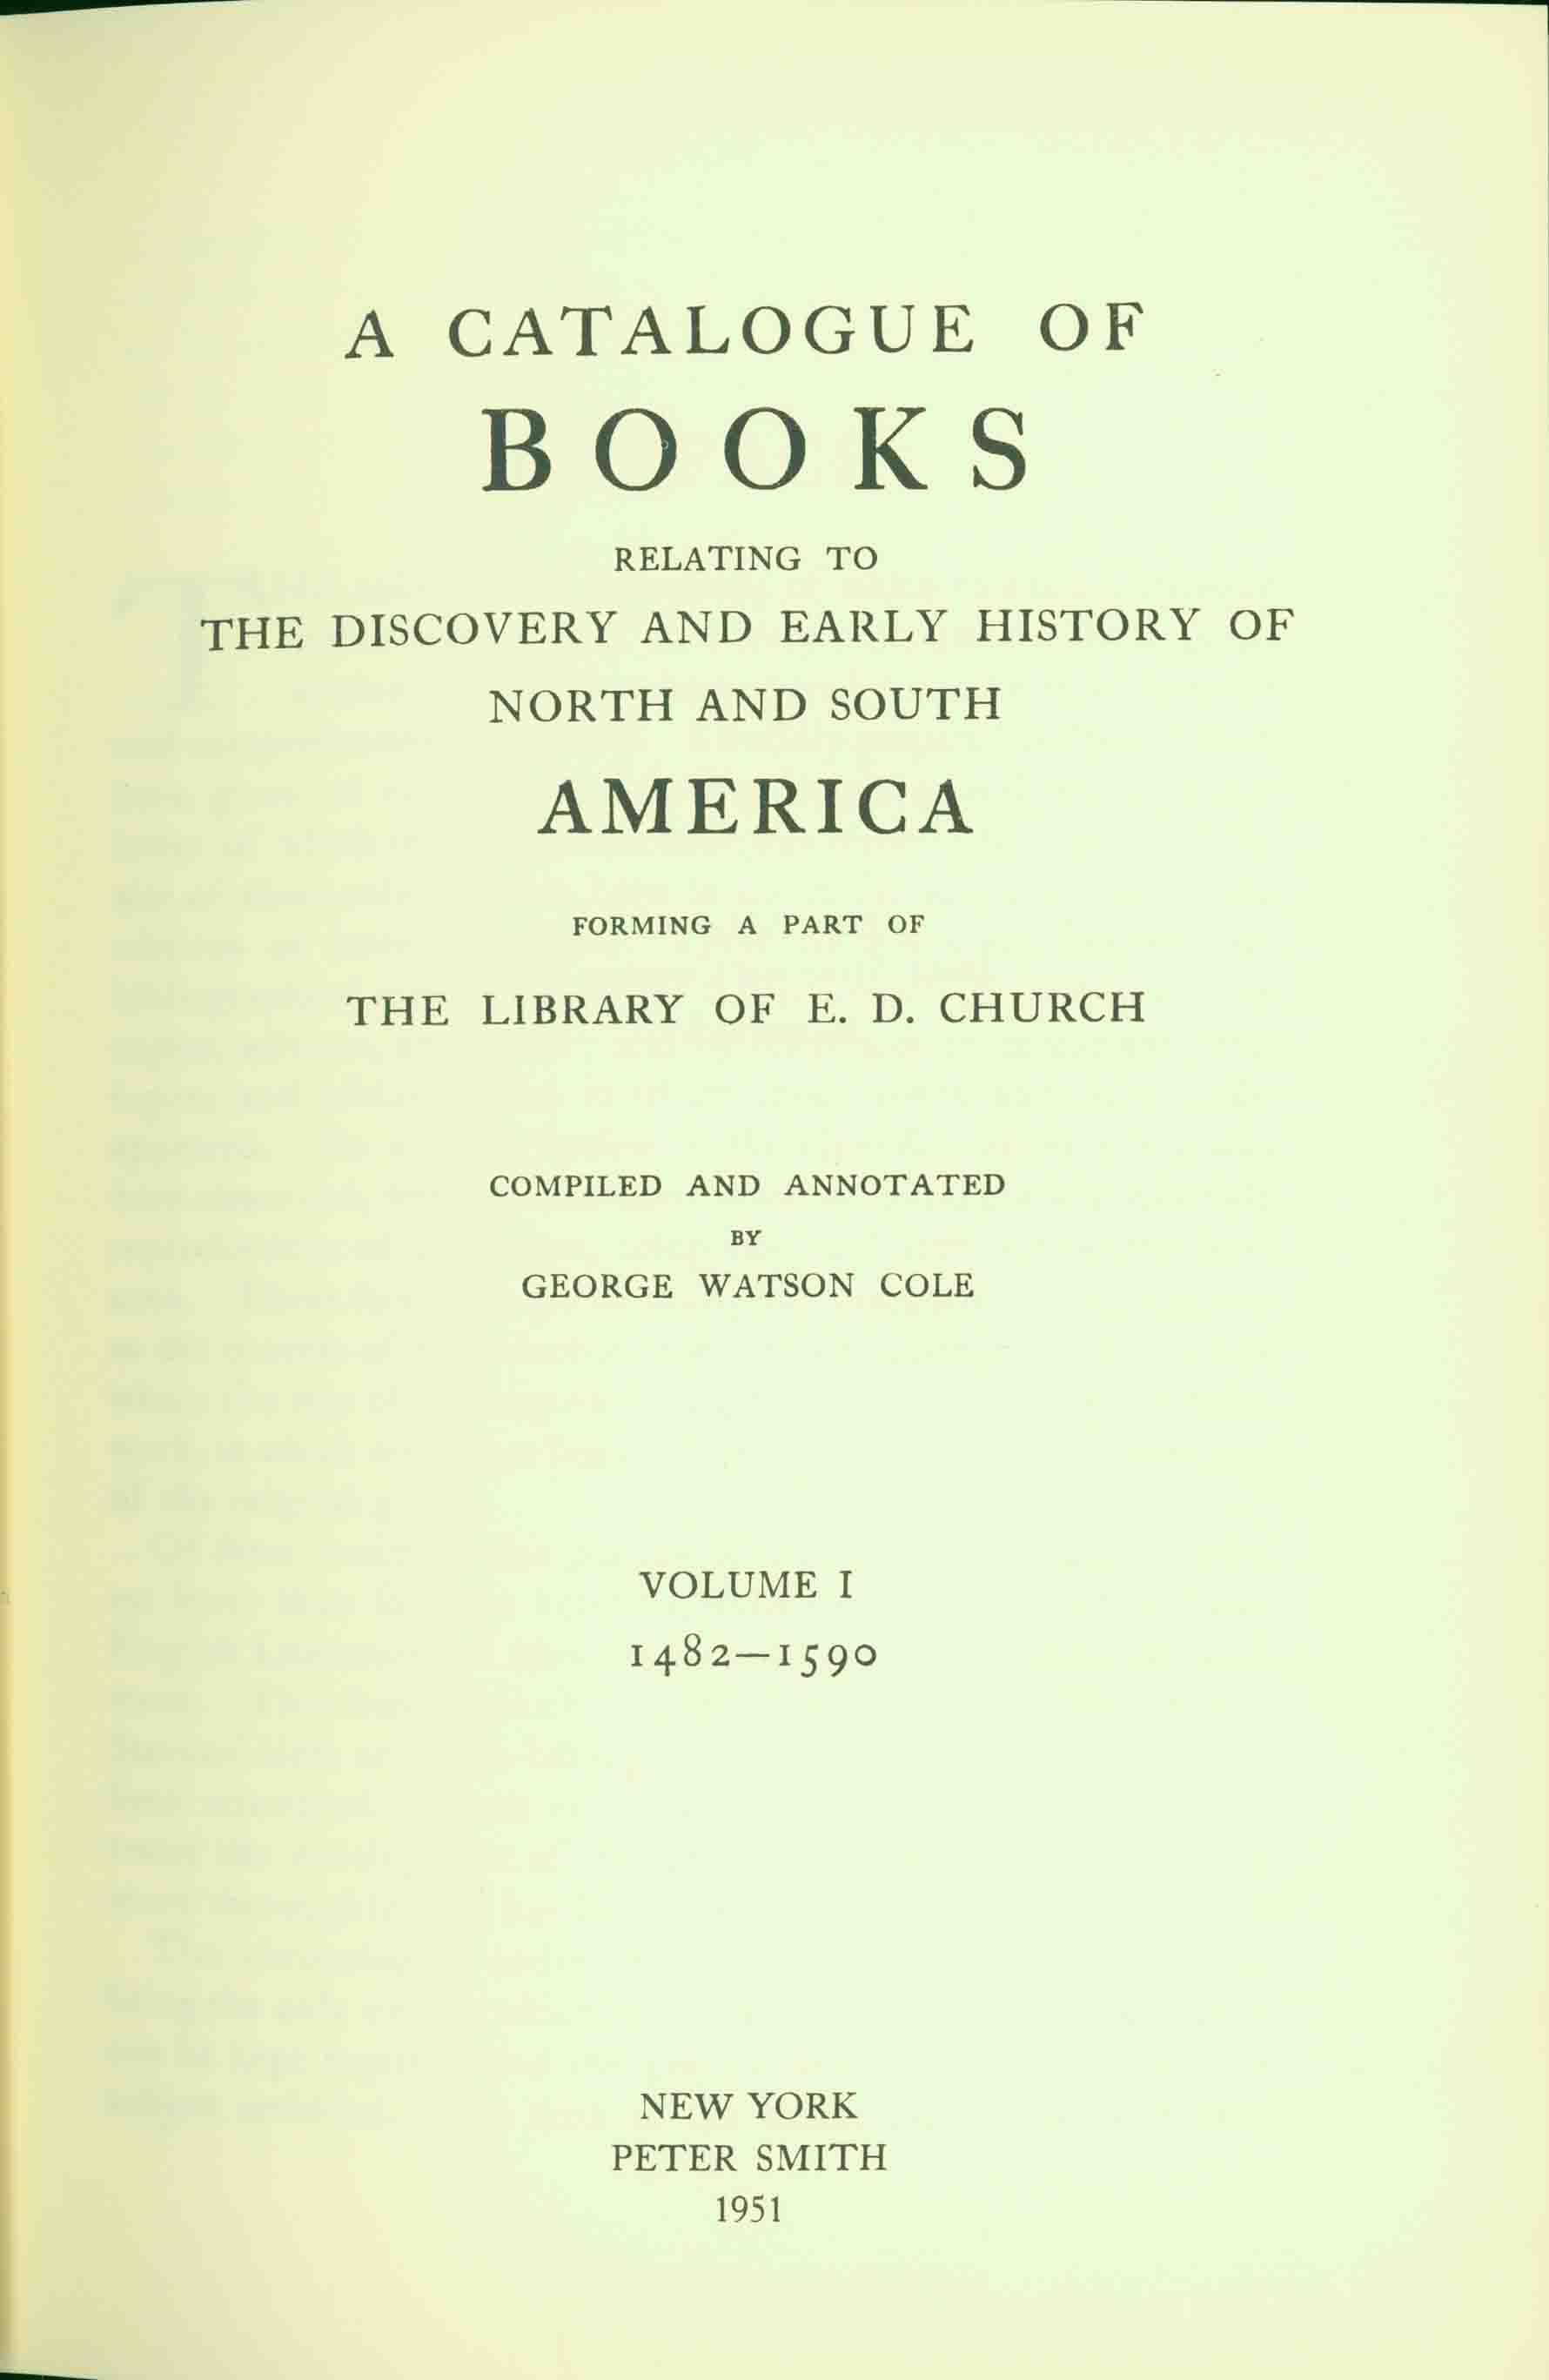 A catalogue of books relating to the discovery and early history of North  and South America forming a part of the library of E.D. Church. Compiled  and annotated by George Watson Cole